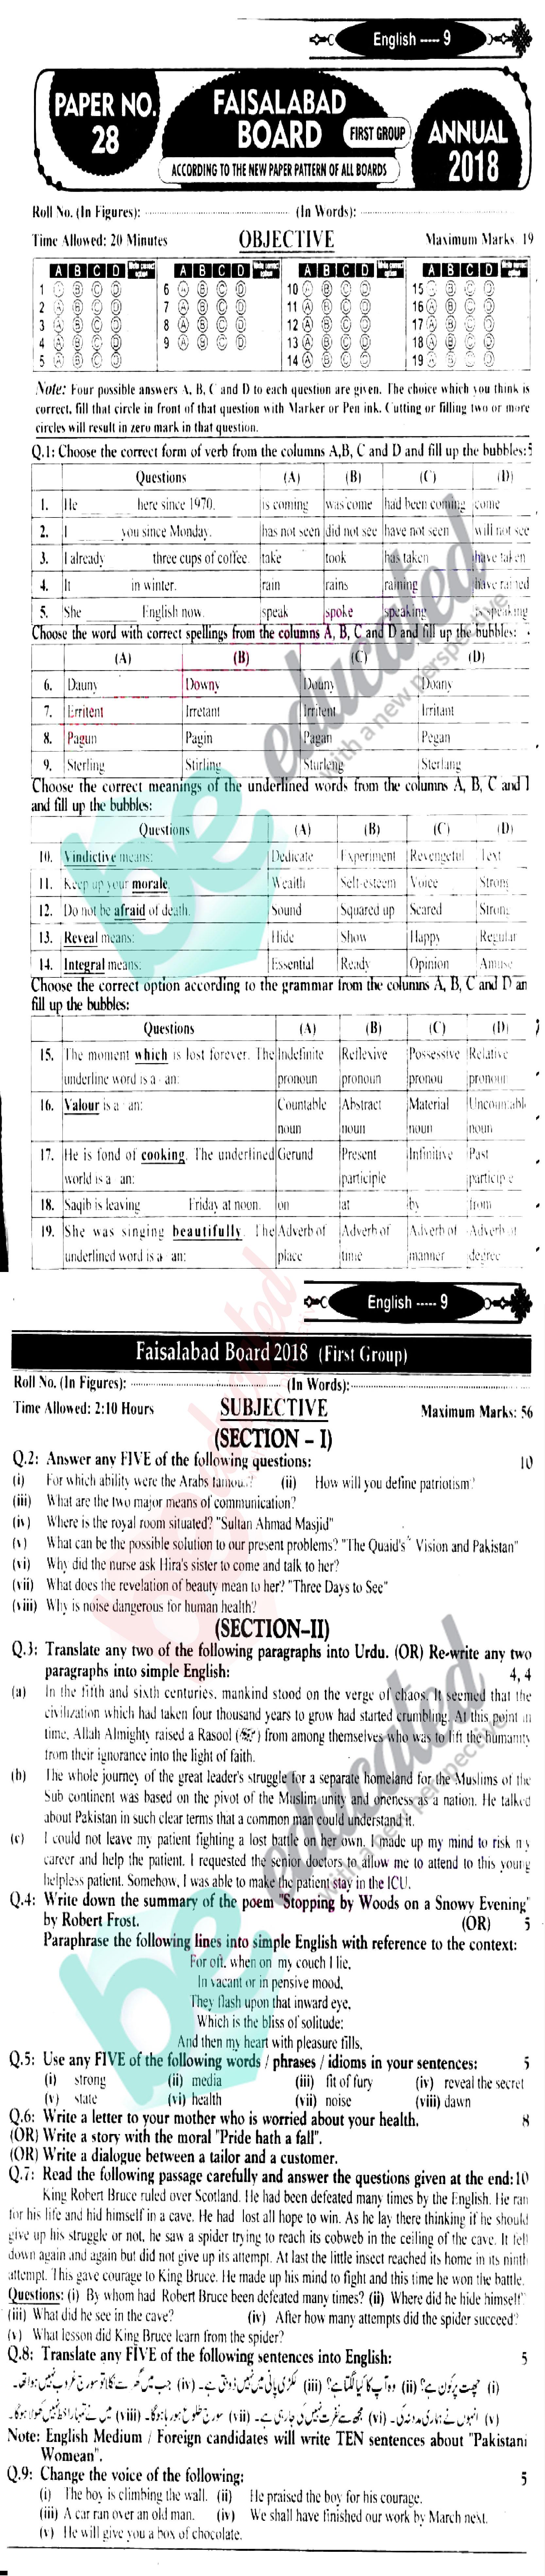 English 9th class Past Paper Group 1 BISE Faisalabad 2018